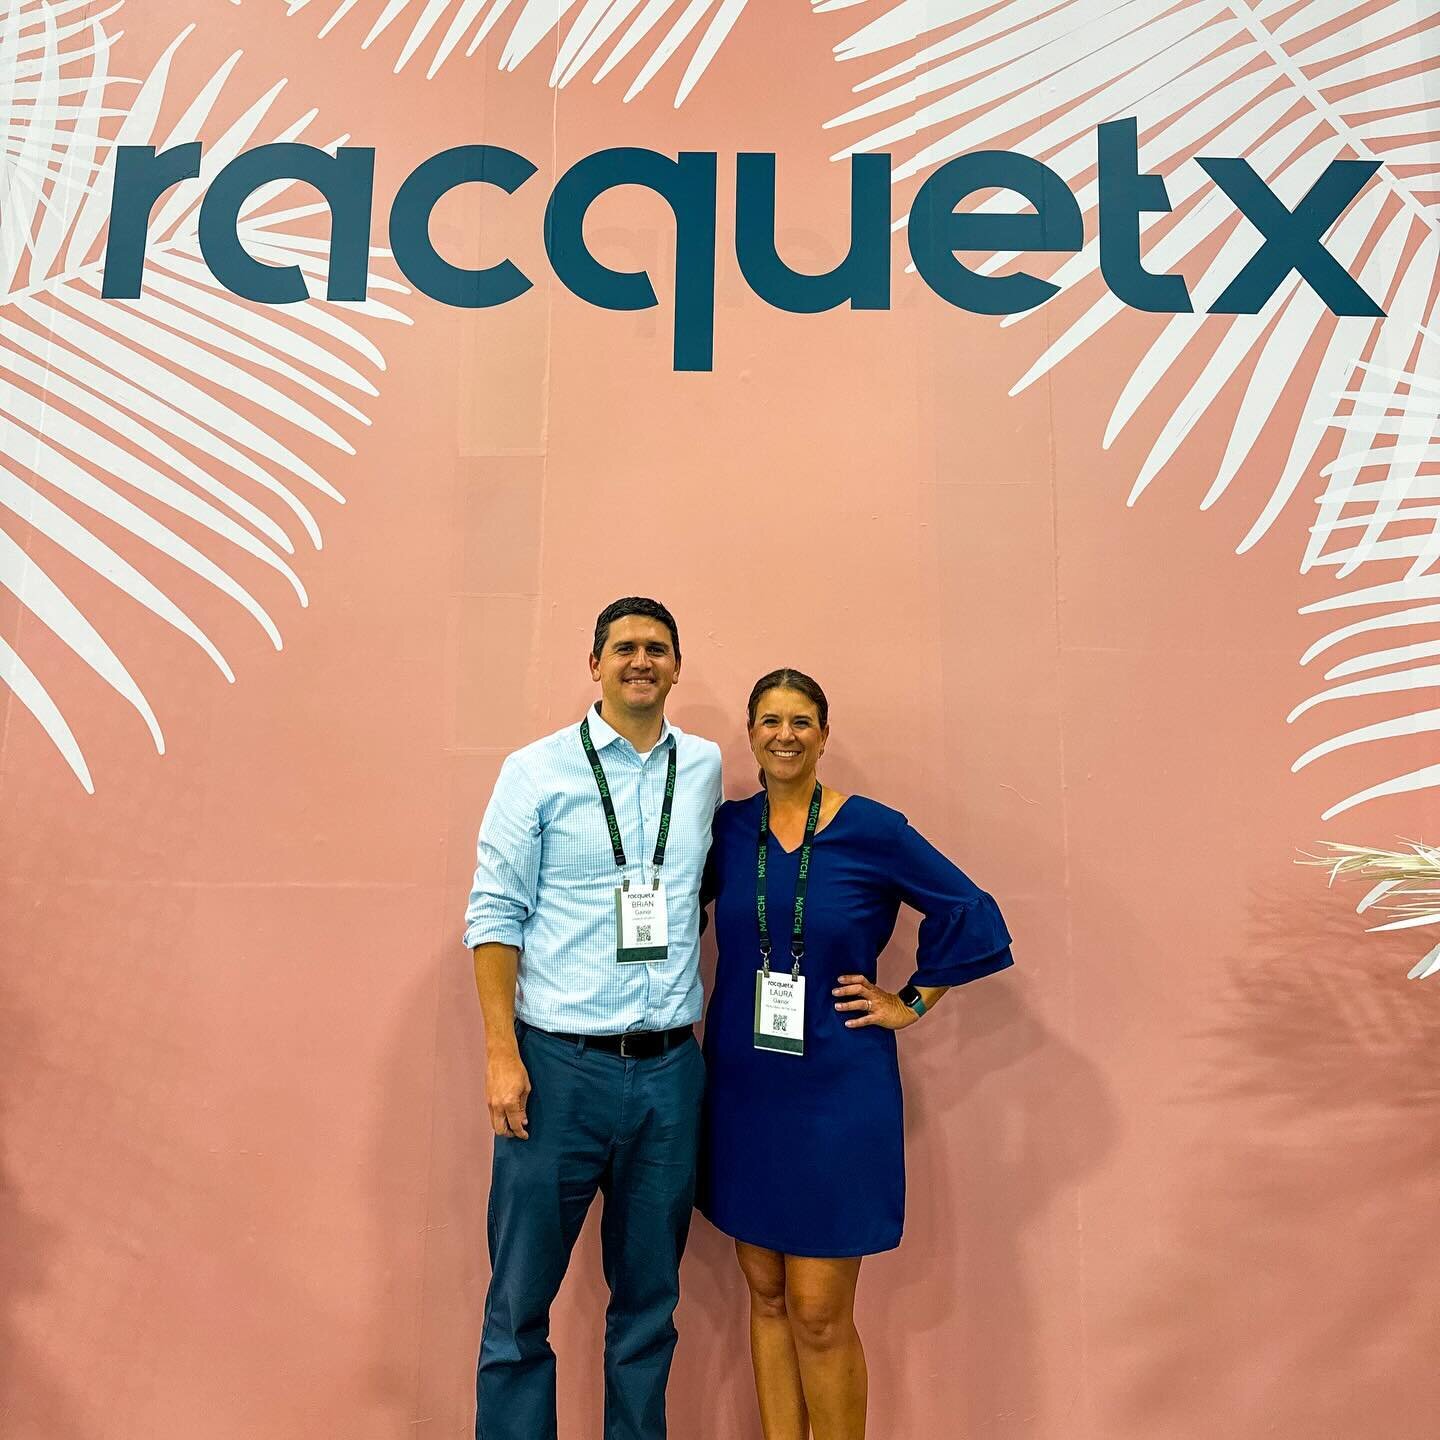 Highlights from @theracquetx! Speaking on a panel, showcasing our collaborations with brands and the media. Also, onsite with our client @centerlineathletics for the launch of their premium performance pickleball apparel brand with pro player @thomas